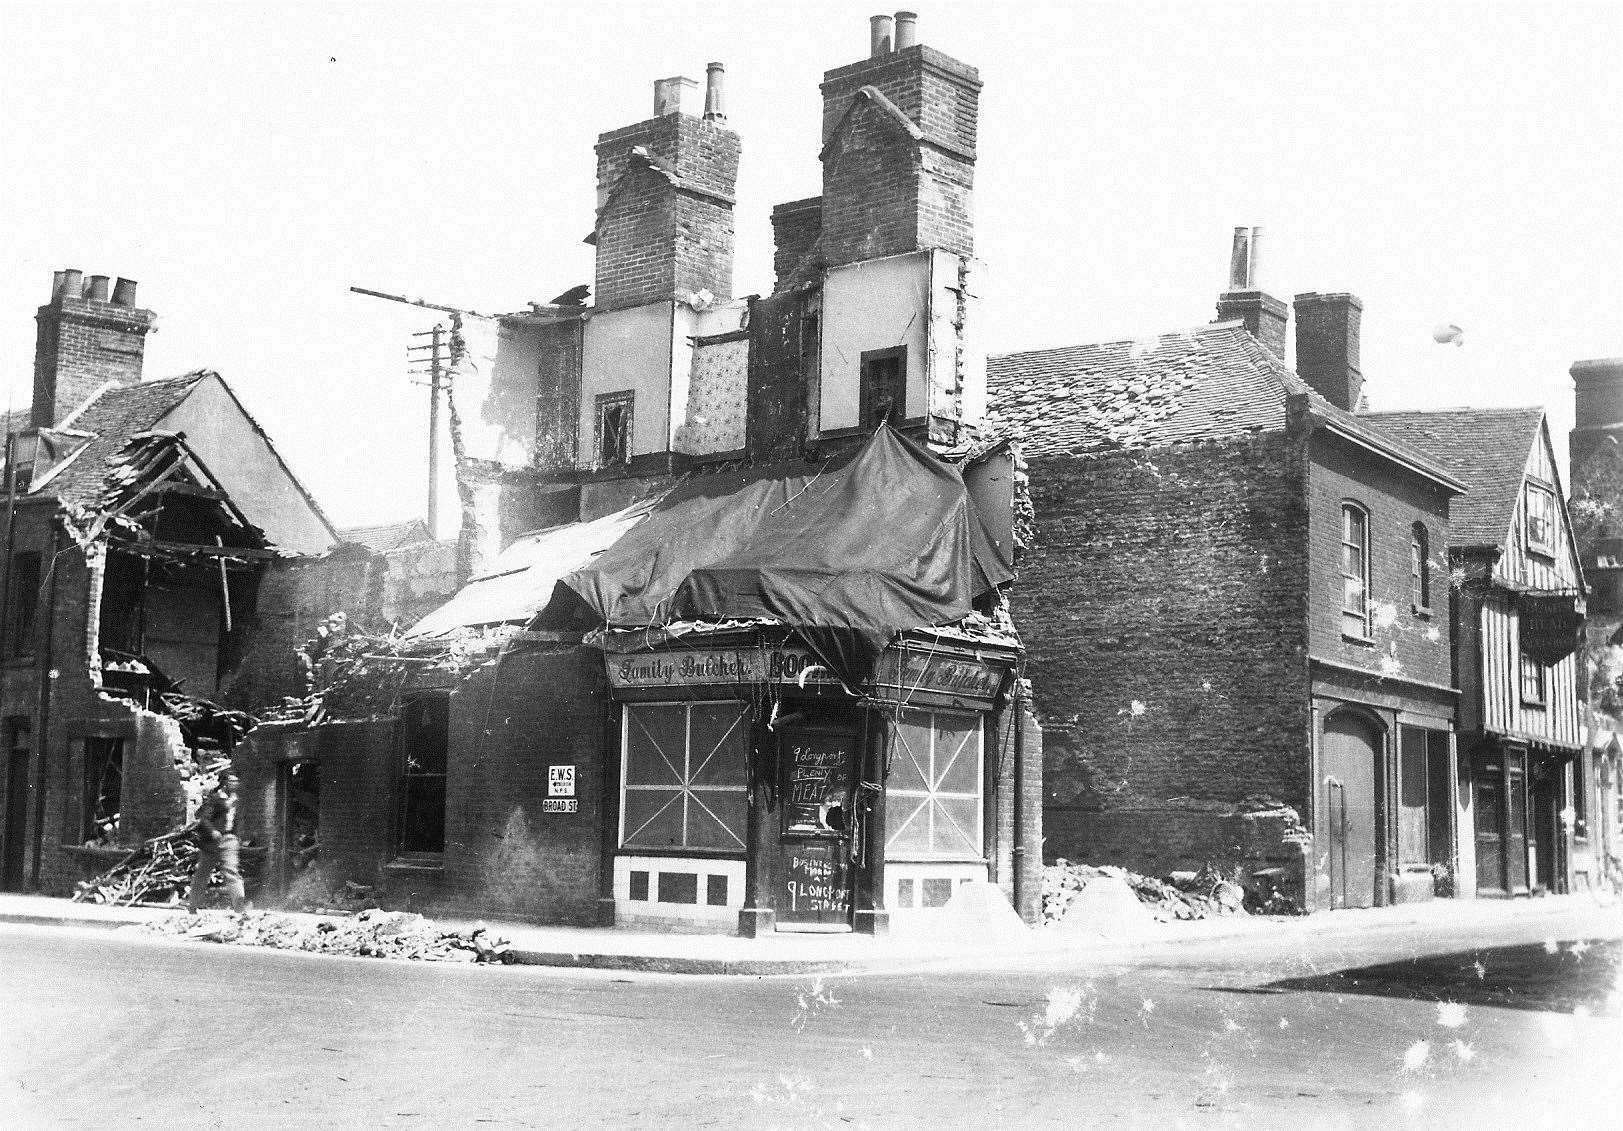 Plenty of meat was still available at Boorman's butchers in the aftermath of the blitz